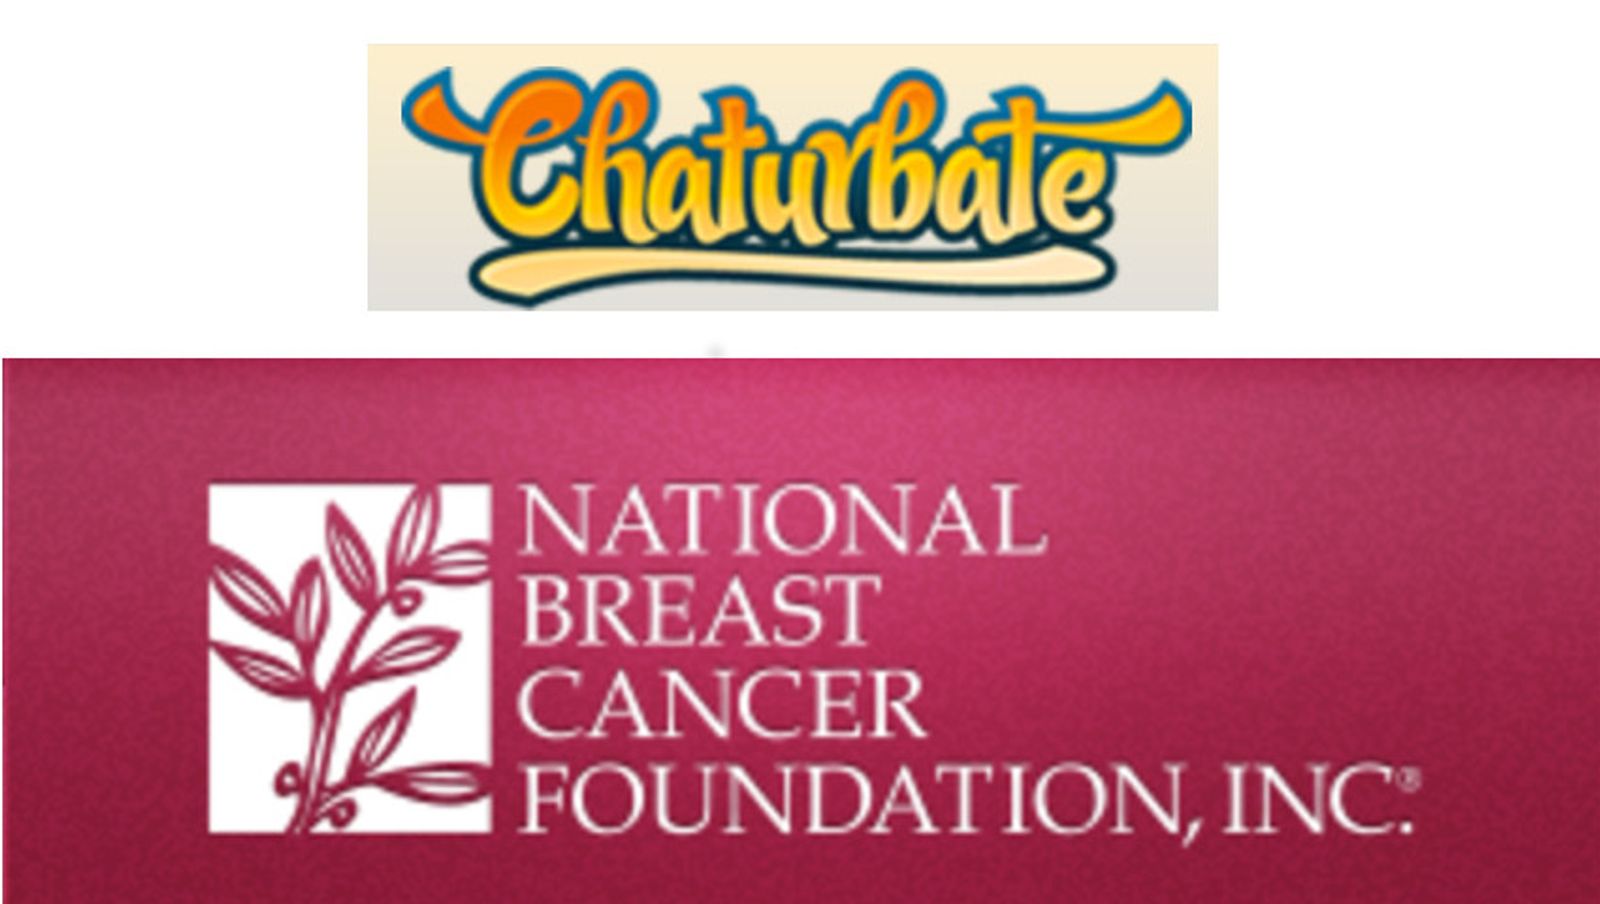 Chaturbate Spreads the Pink Spirit With National Breast Cancer Foundation Donation